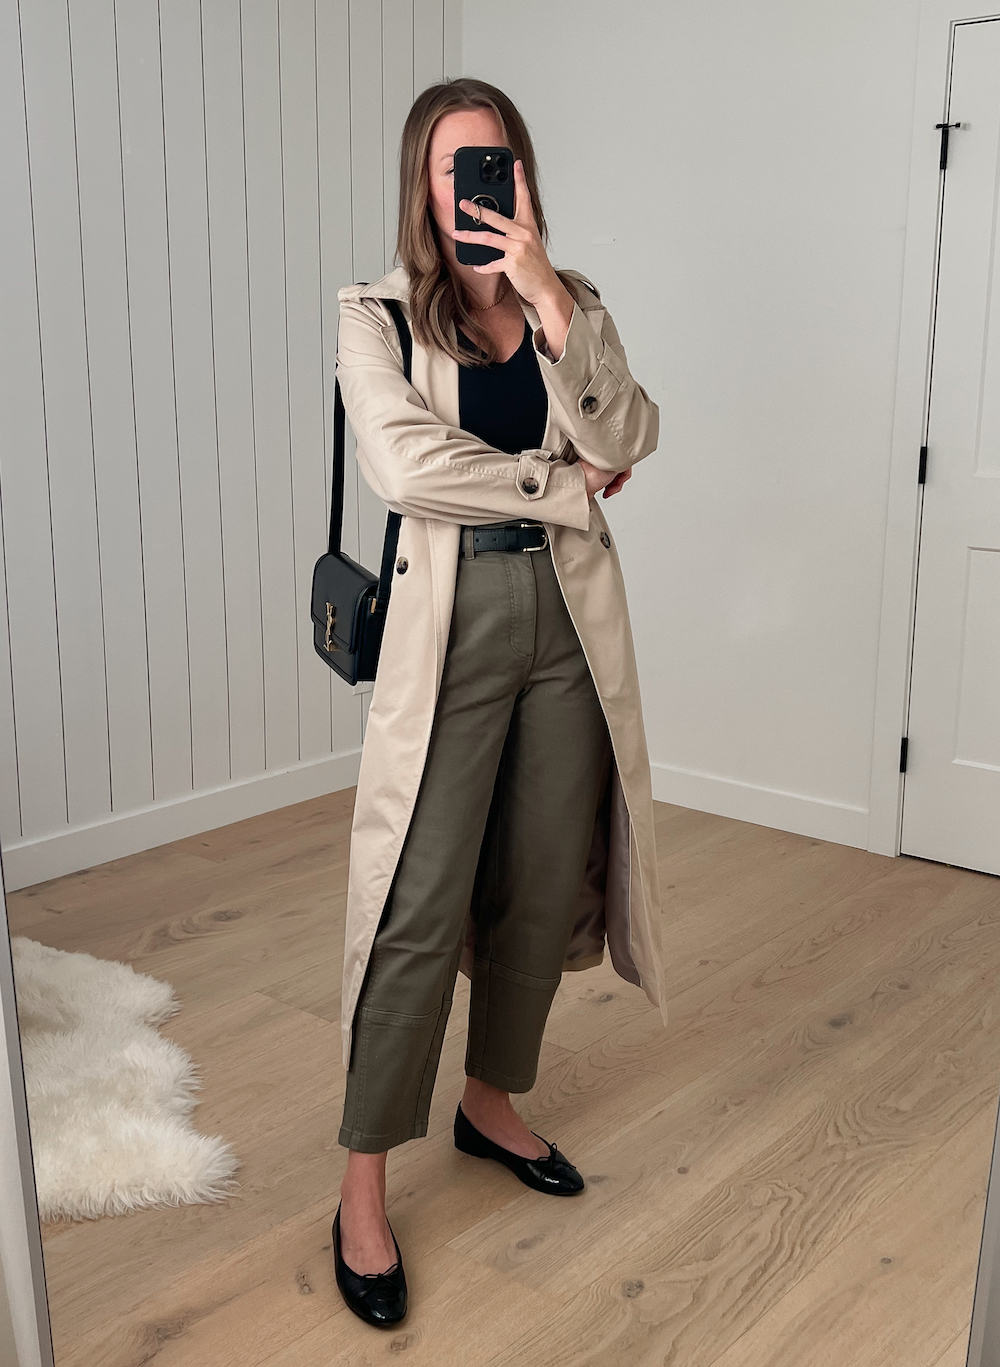 Christal wearing a long tan trench coat over a black top and green pants with black ballet flats